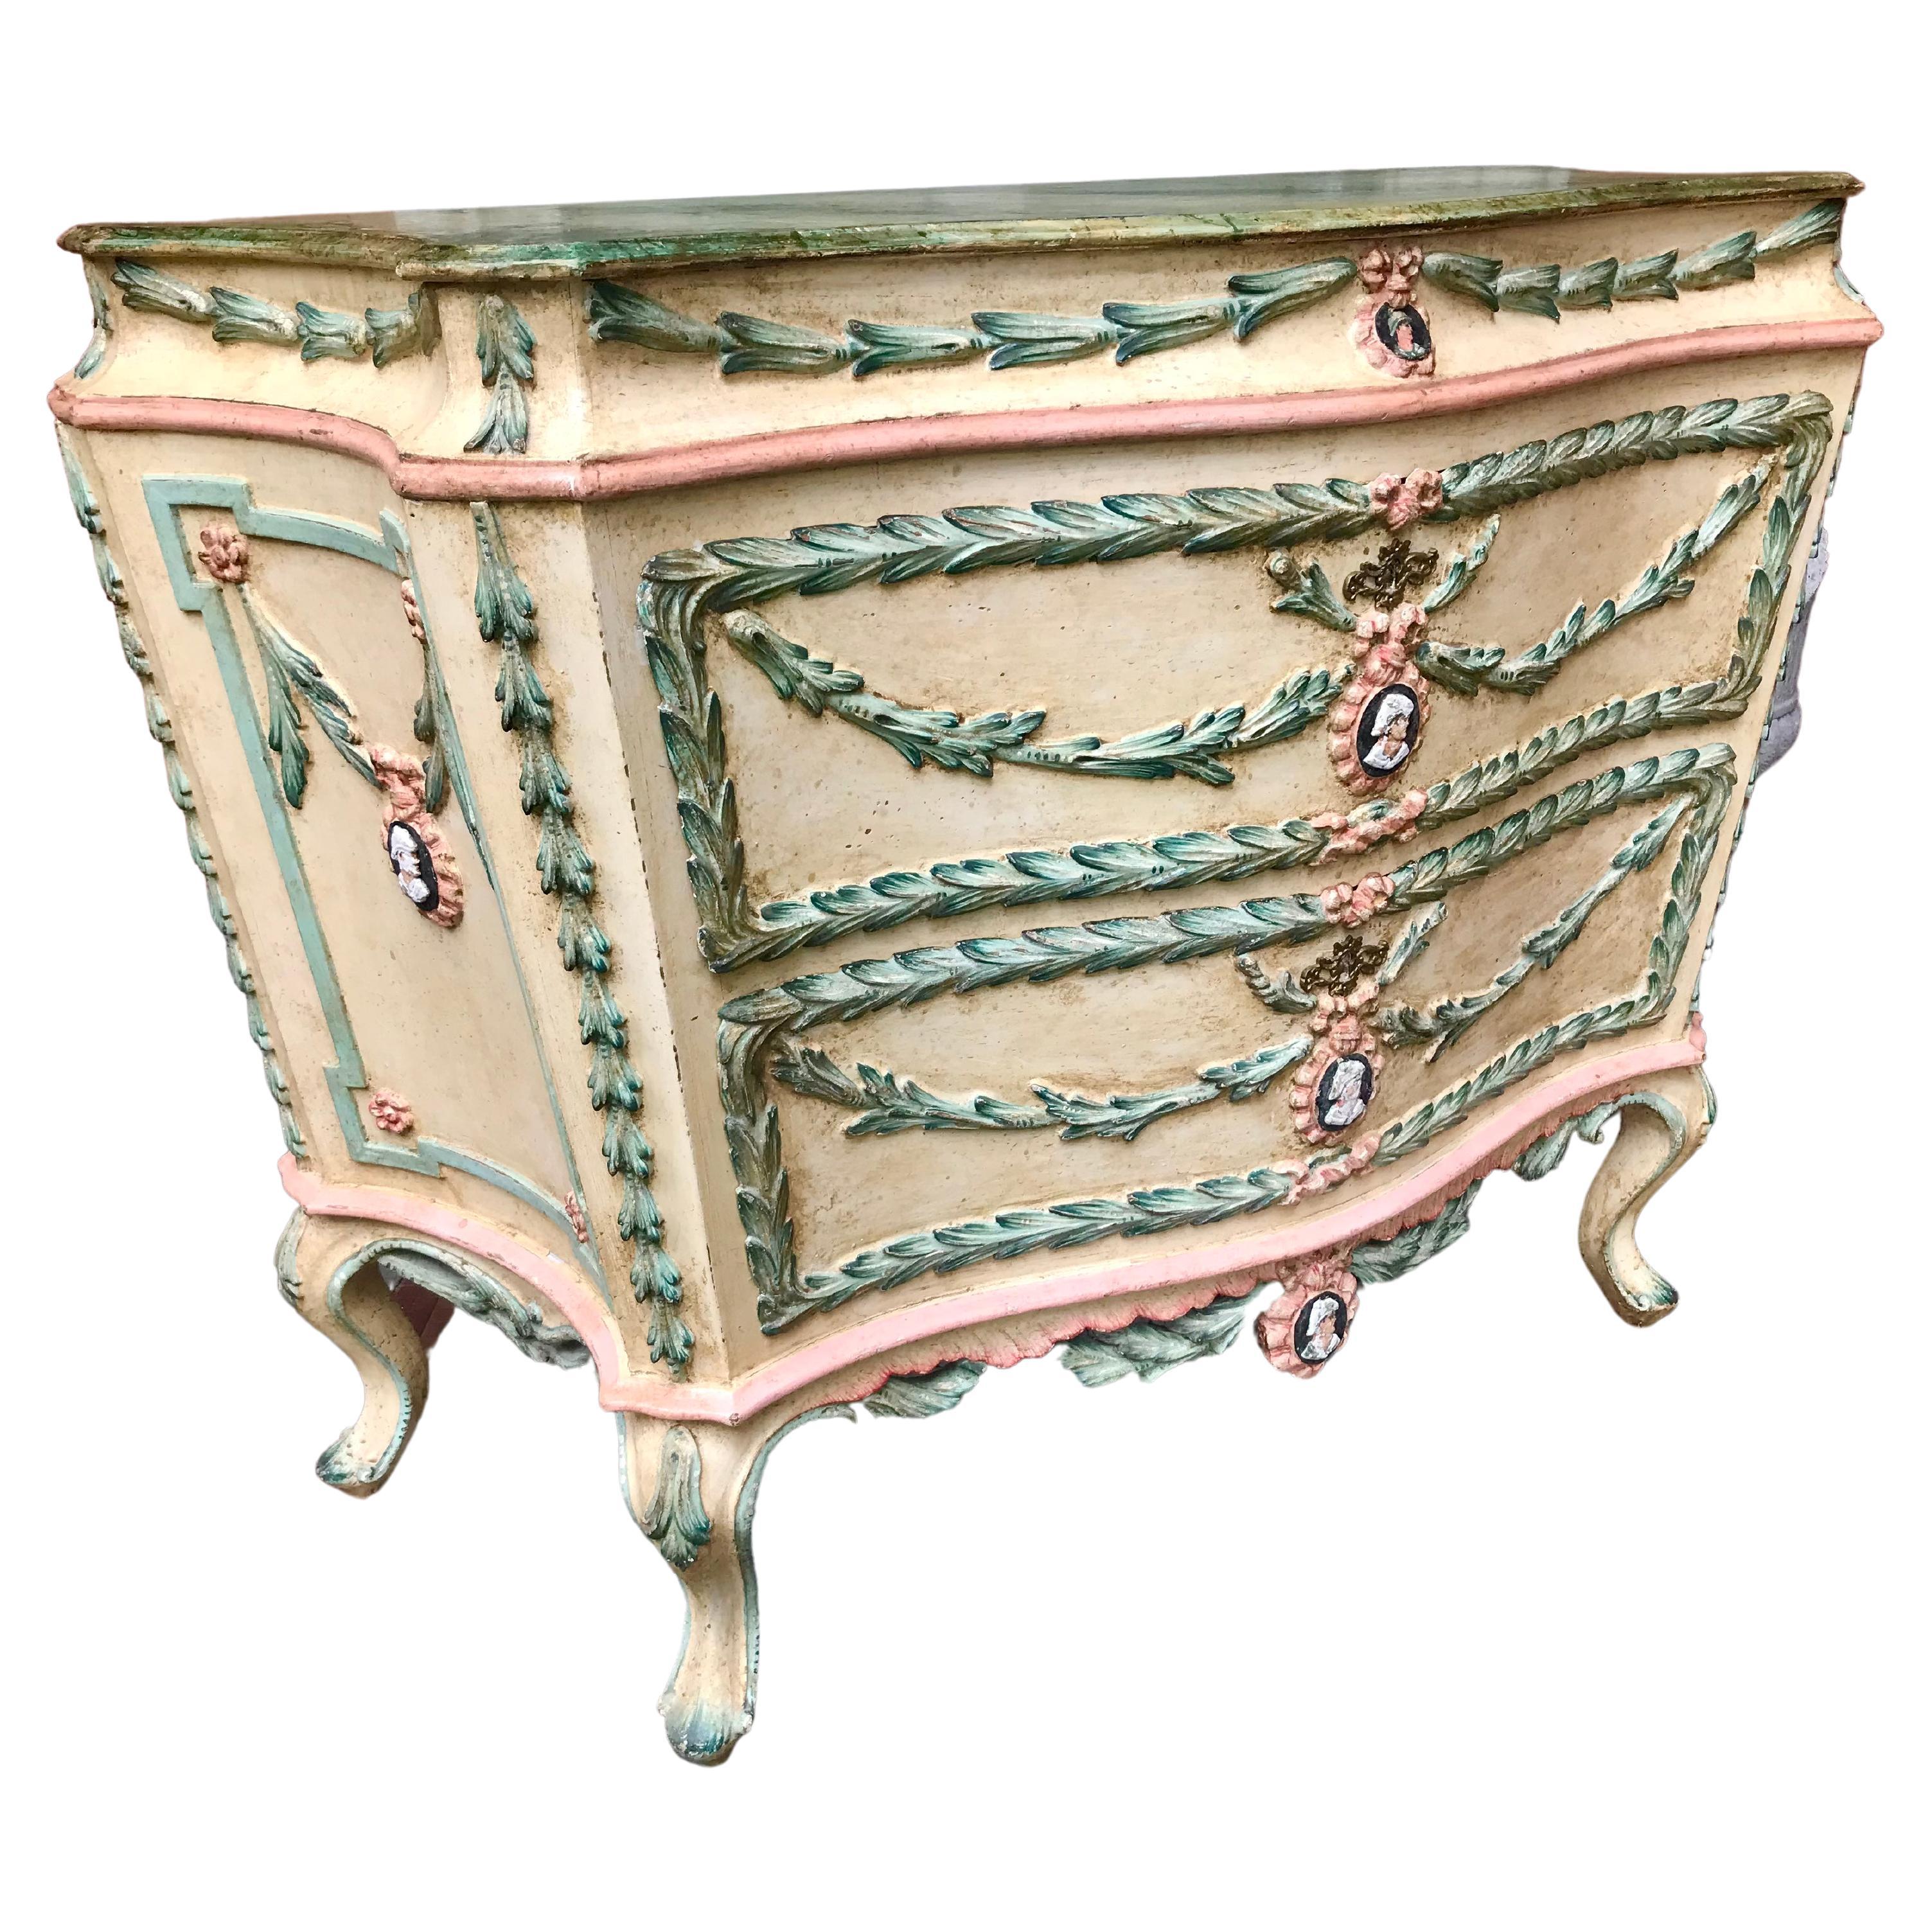 Italian or Venetian Pastel Painted Commode Carved in Relief For Sale